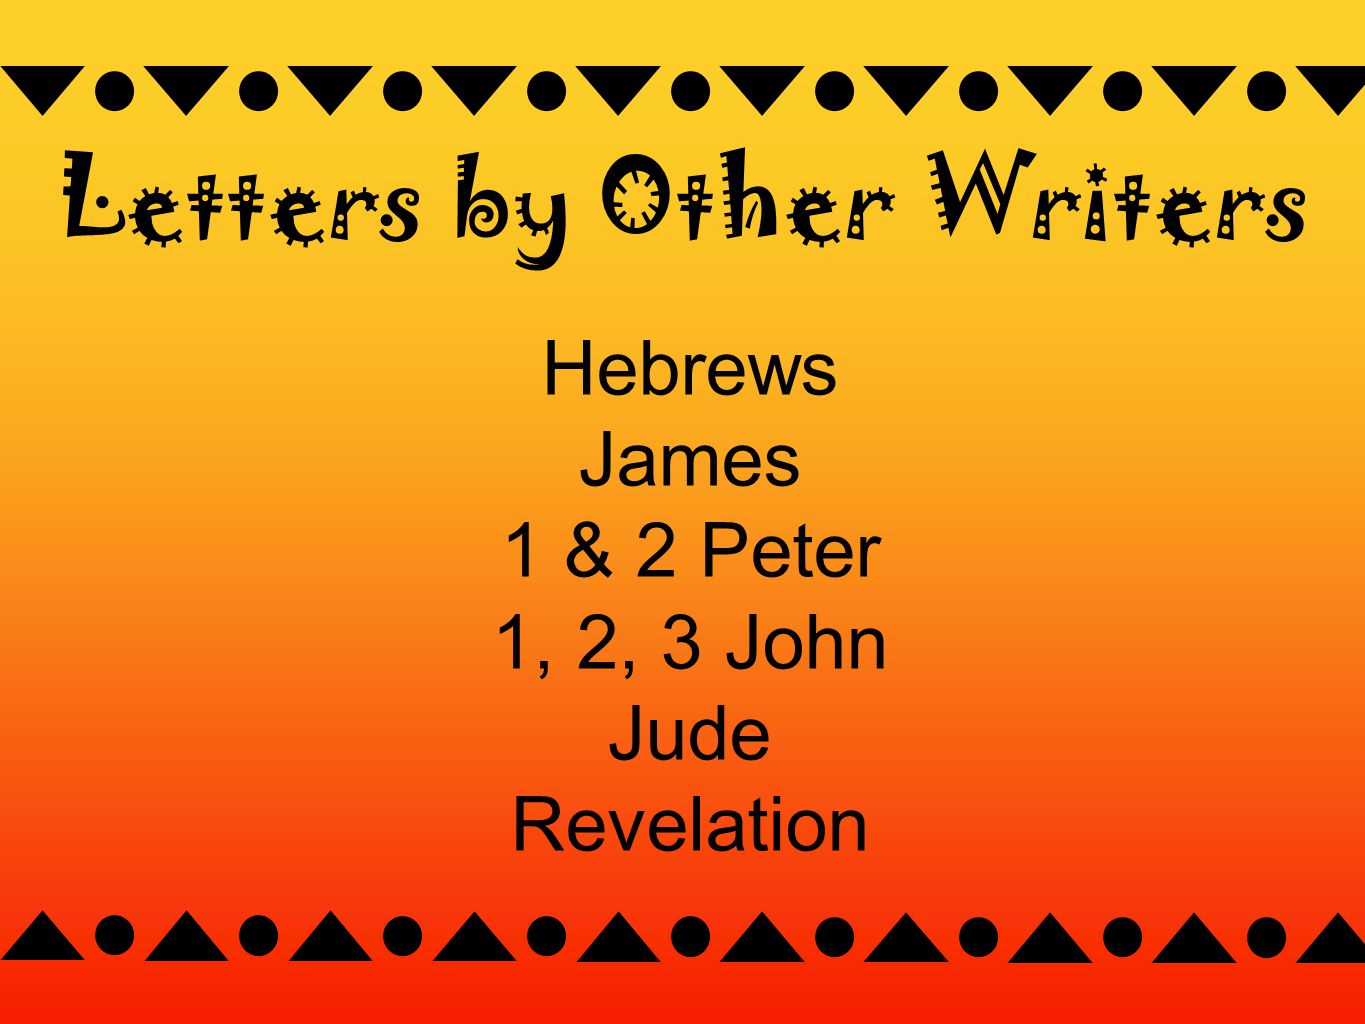 Letters by Other Writers Hebrews James 1 & 2 Peter 1, 2, 3 John Jude Revelation